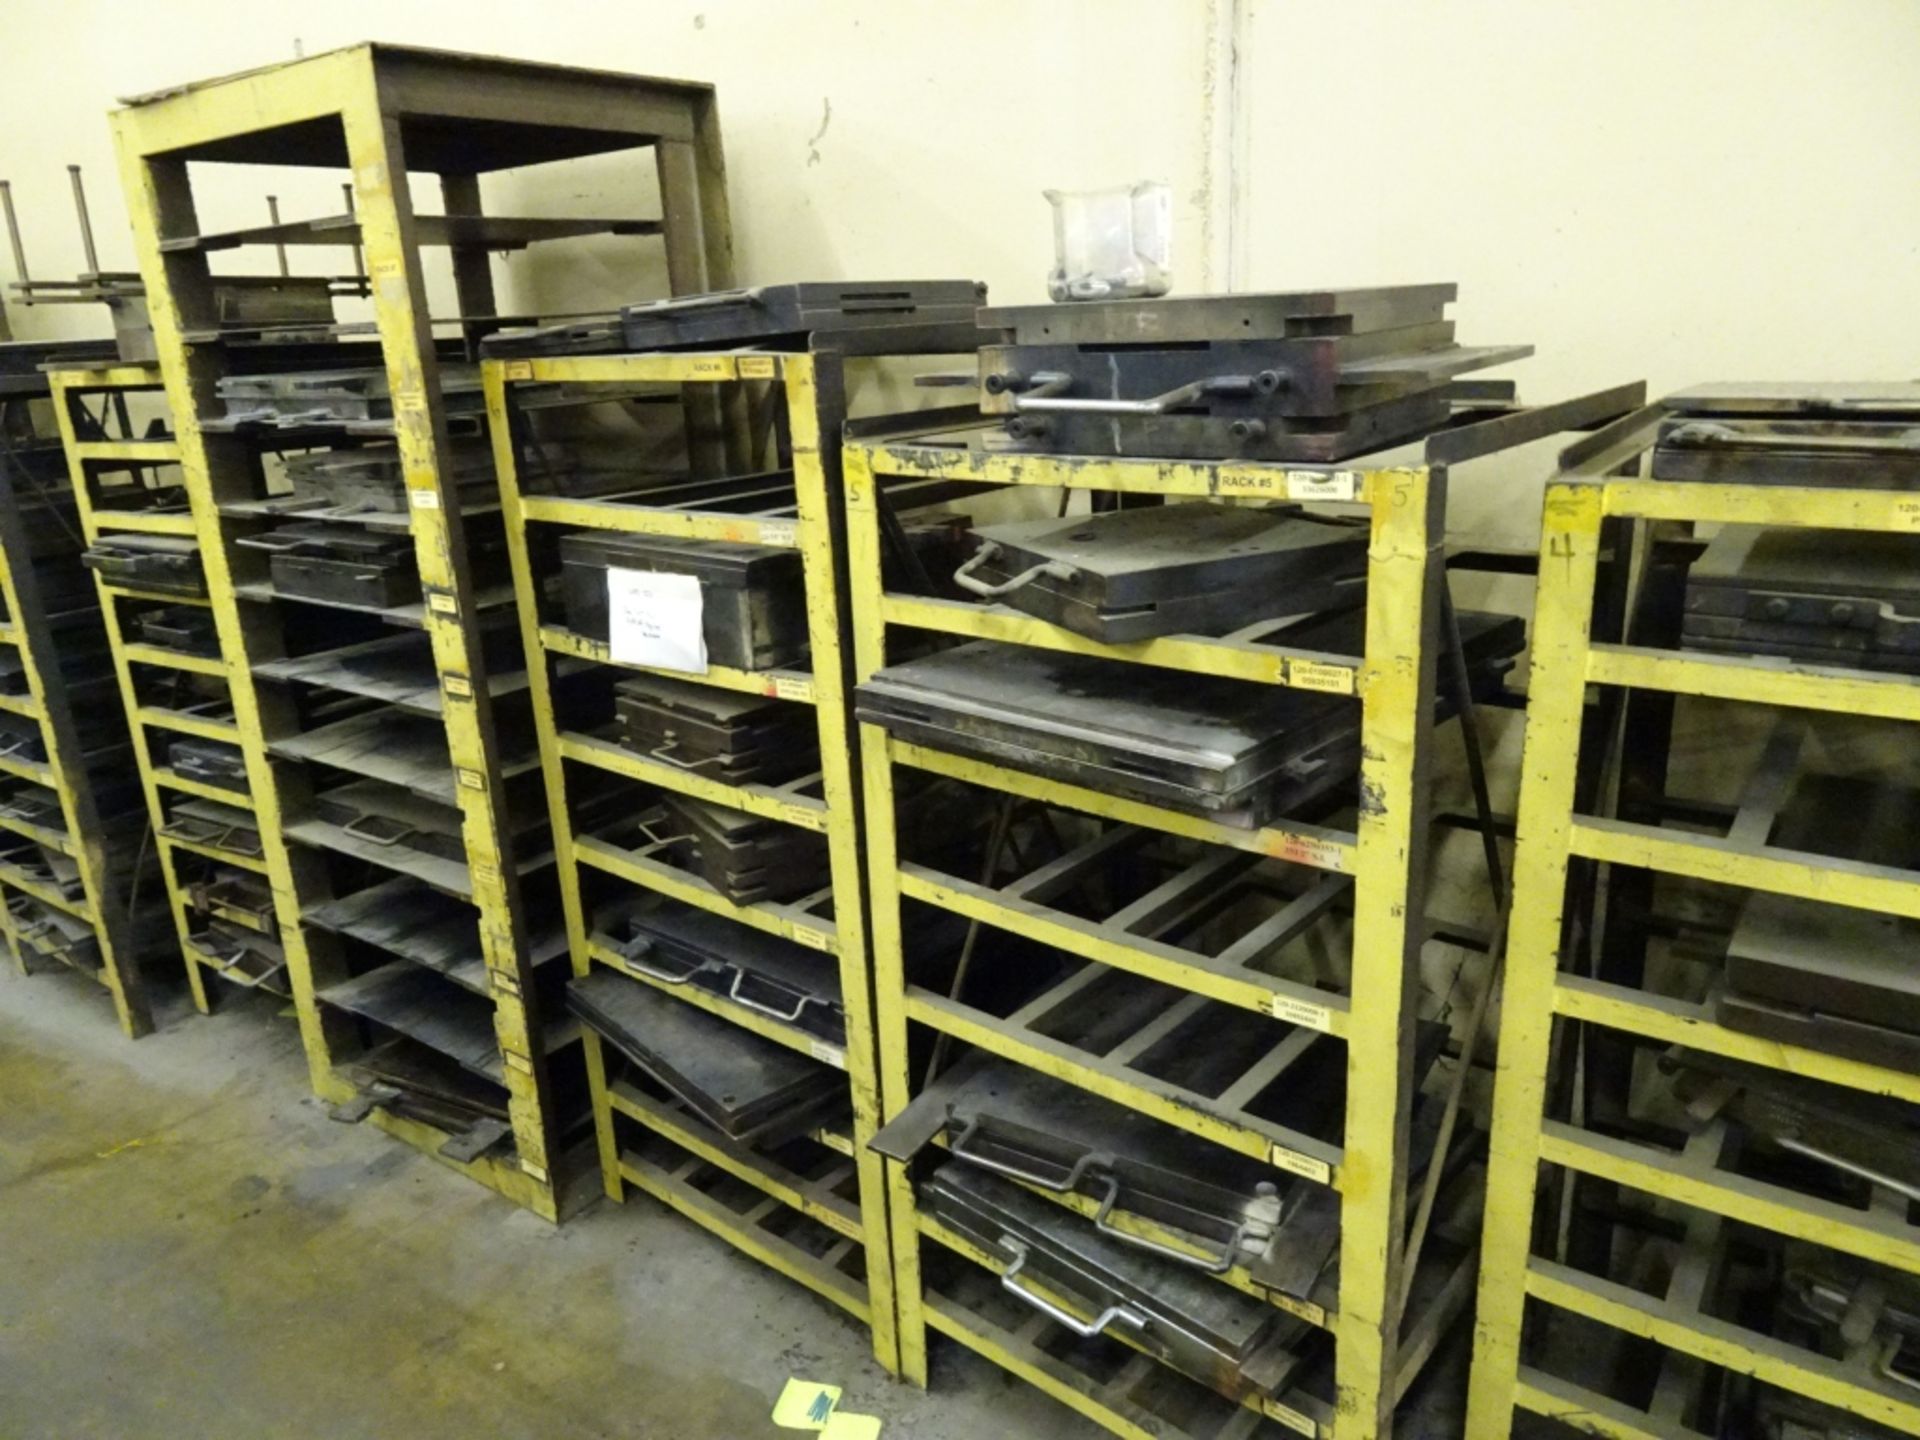 (14) Various Sized Heavy Duty Steel Mold Racks With No Contents - Image 5 of 6